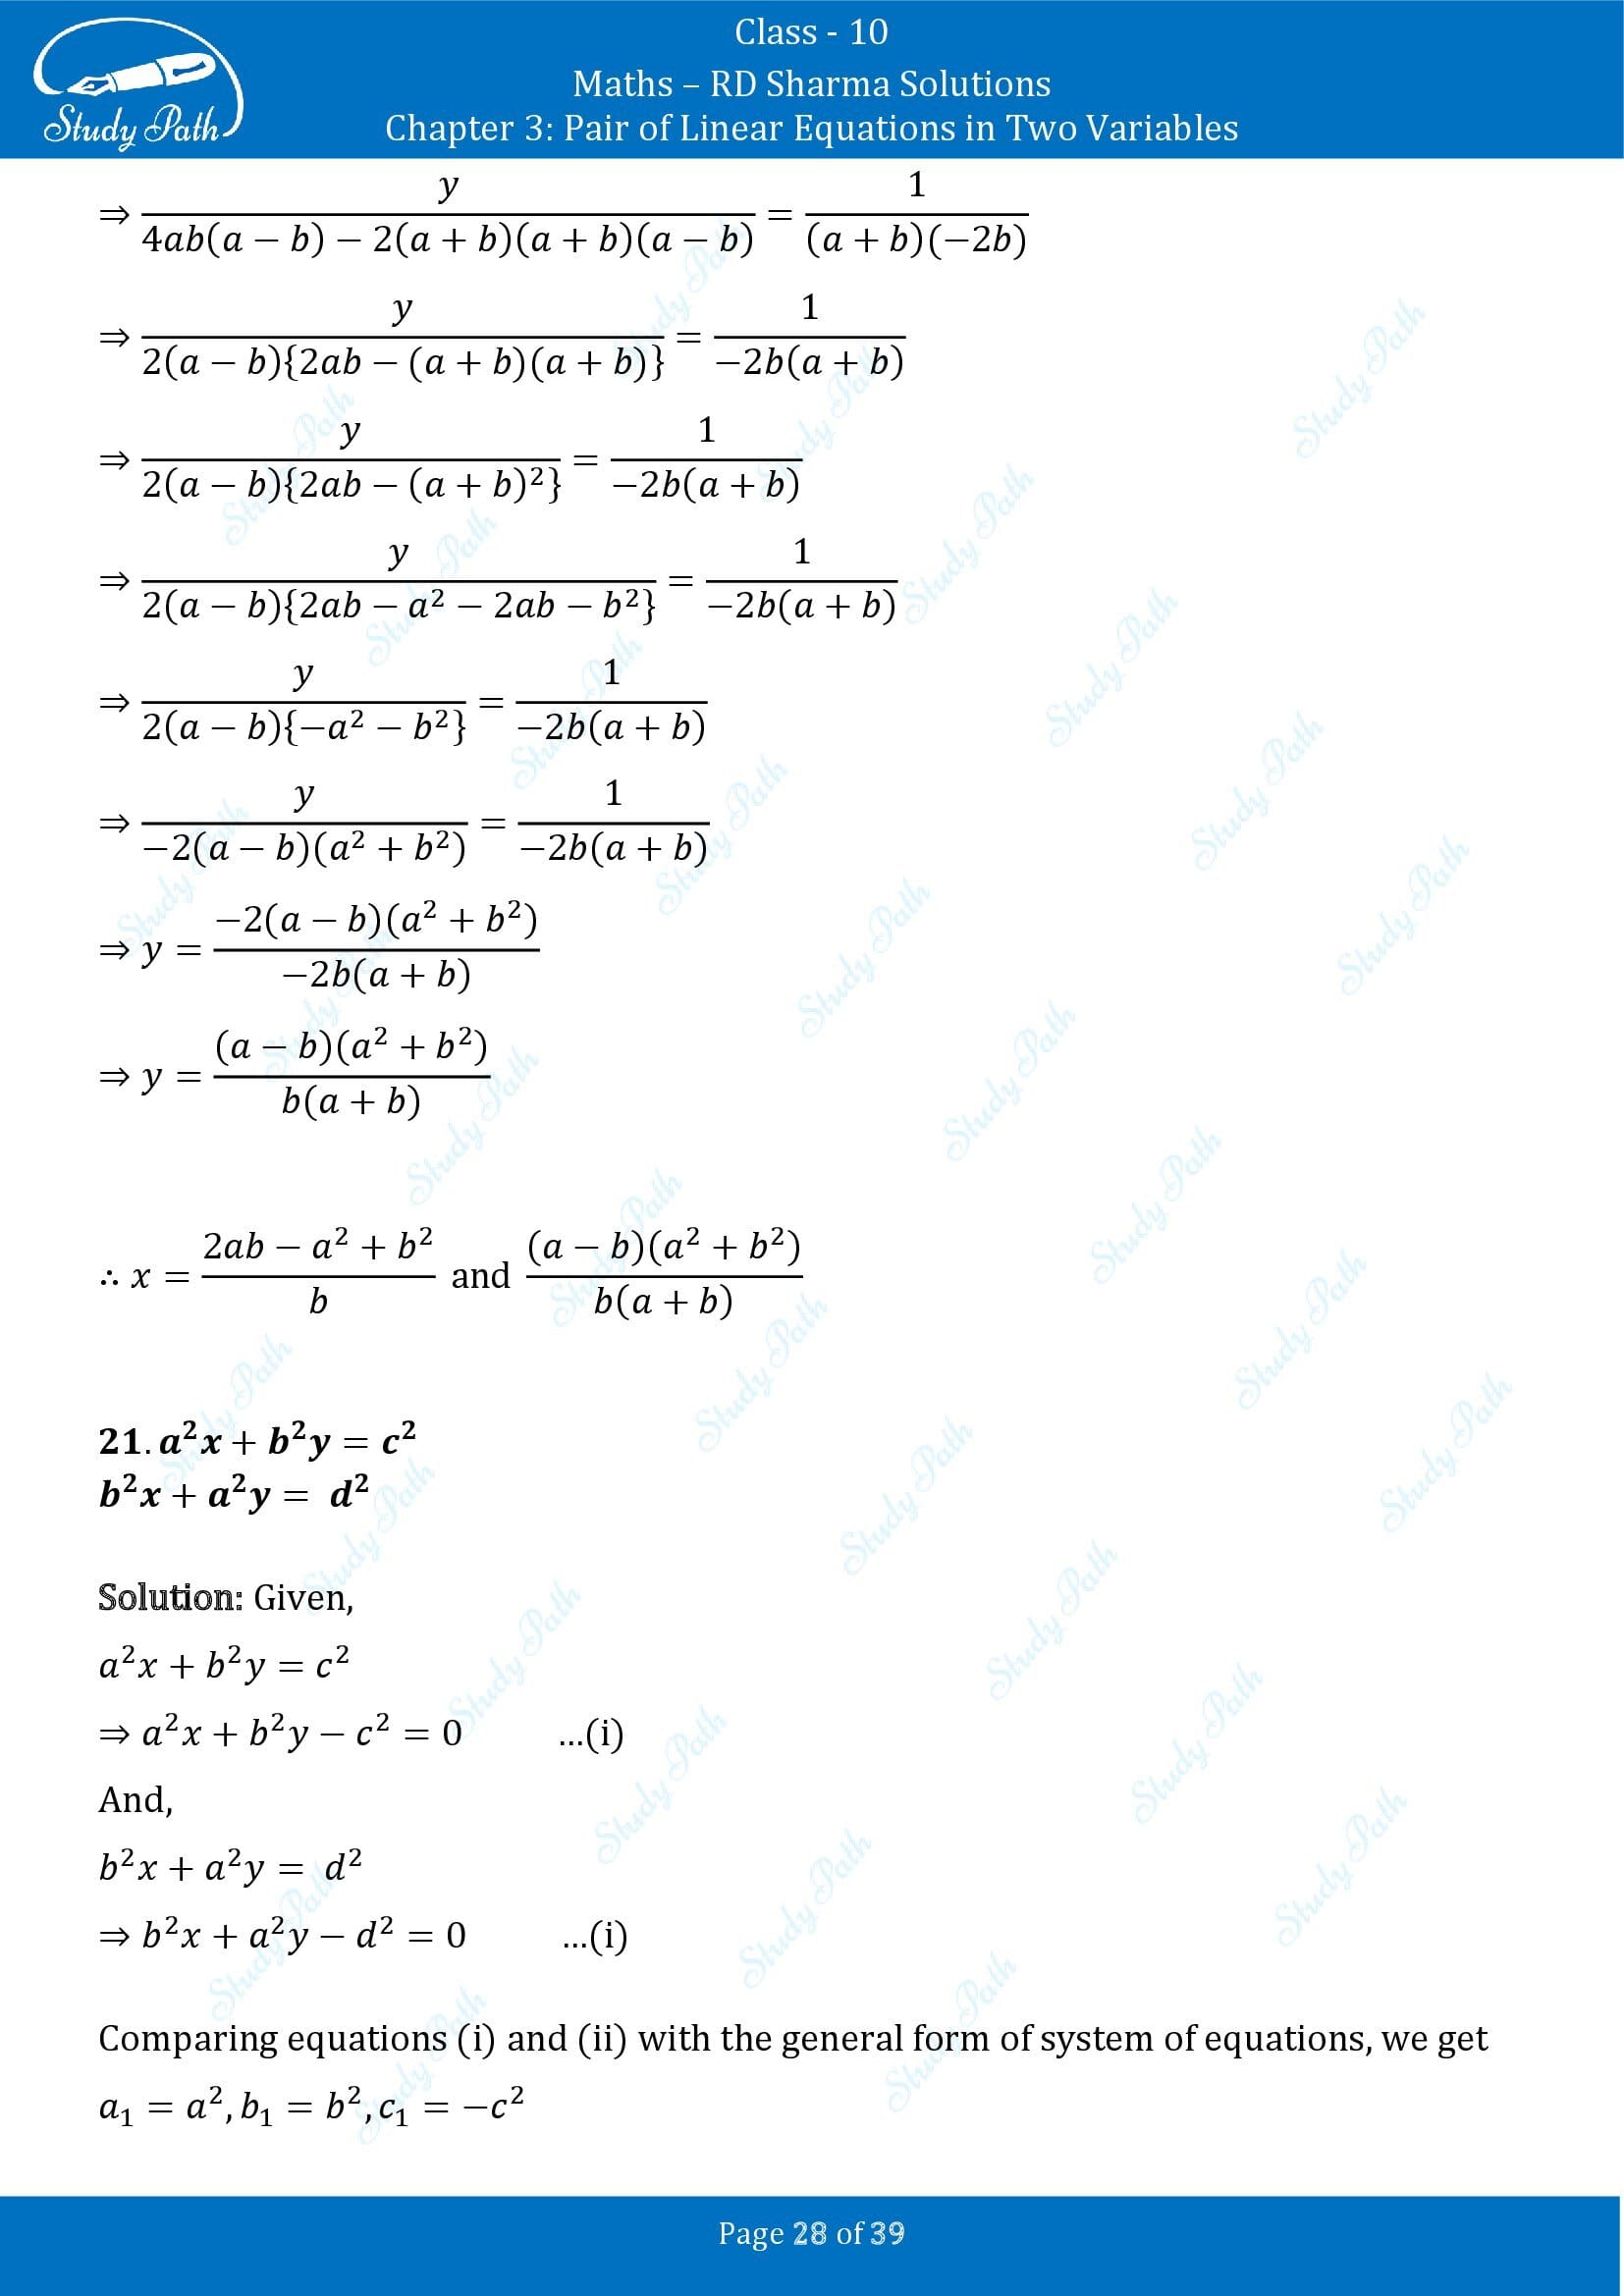 RD Sharma Solutions Class 10 Chapter 3 Pair of Linear Equations in Two Variables Exercise 3.4 00028